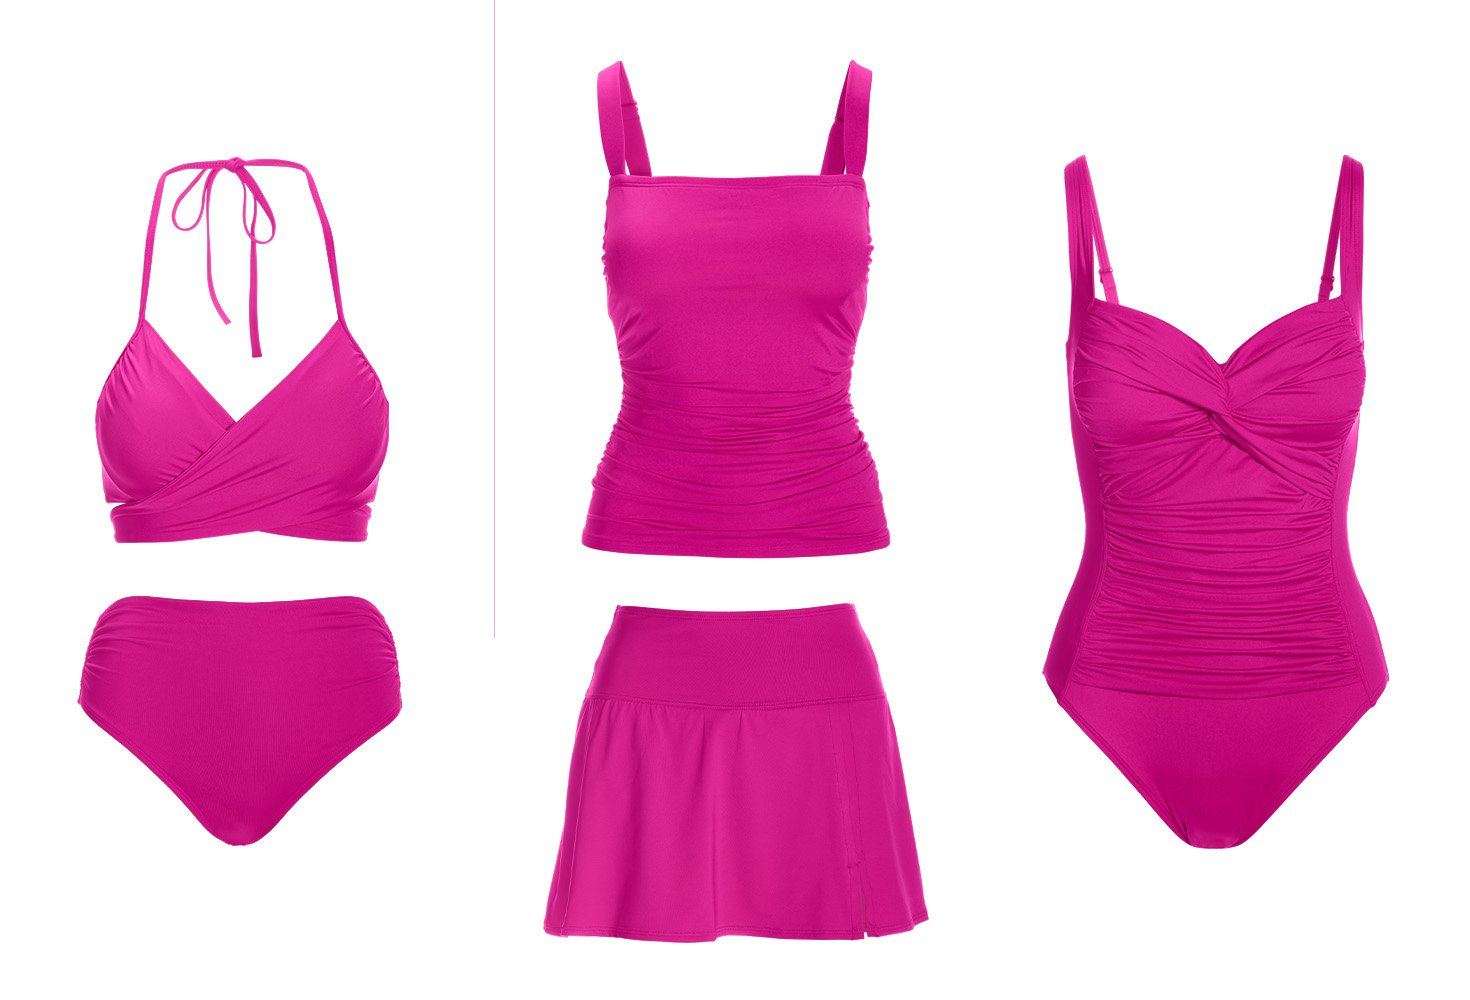 From left to right: pink bikini with high waisted bottoms, pink tankini with skirted bottoms, and pink ruched one-piece swimsuit.